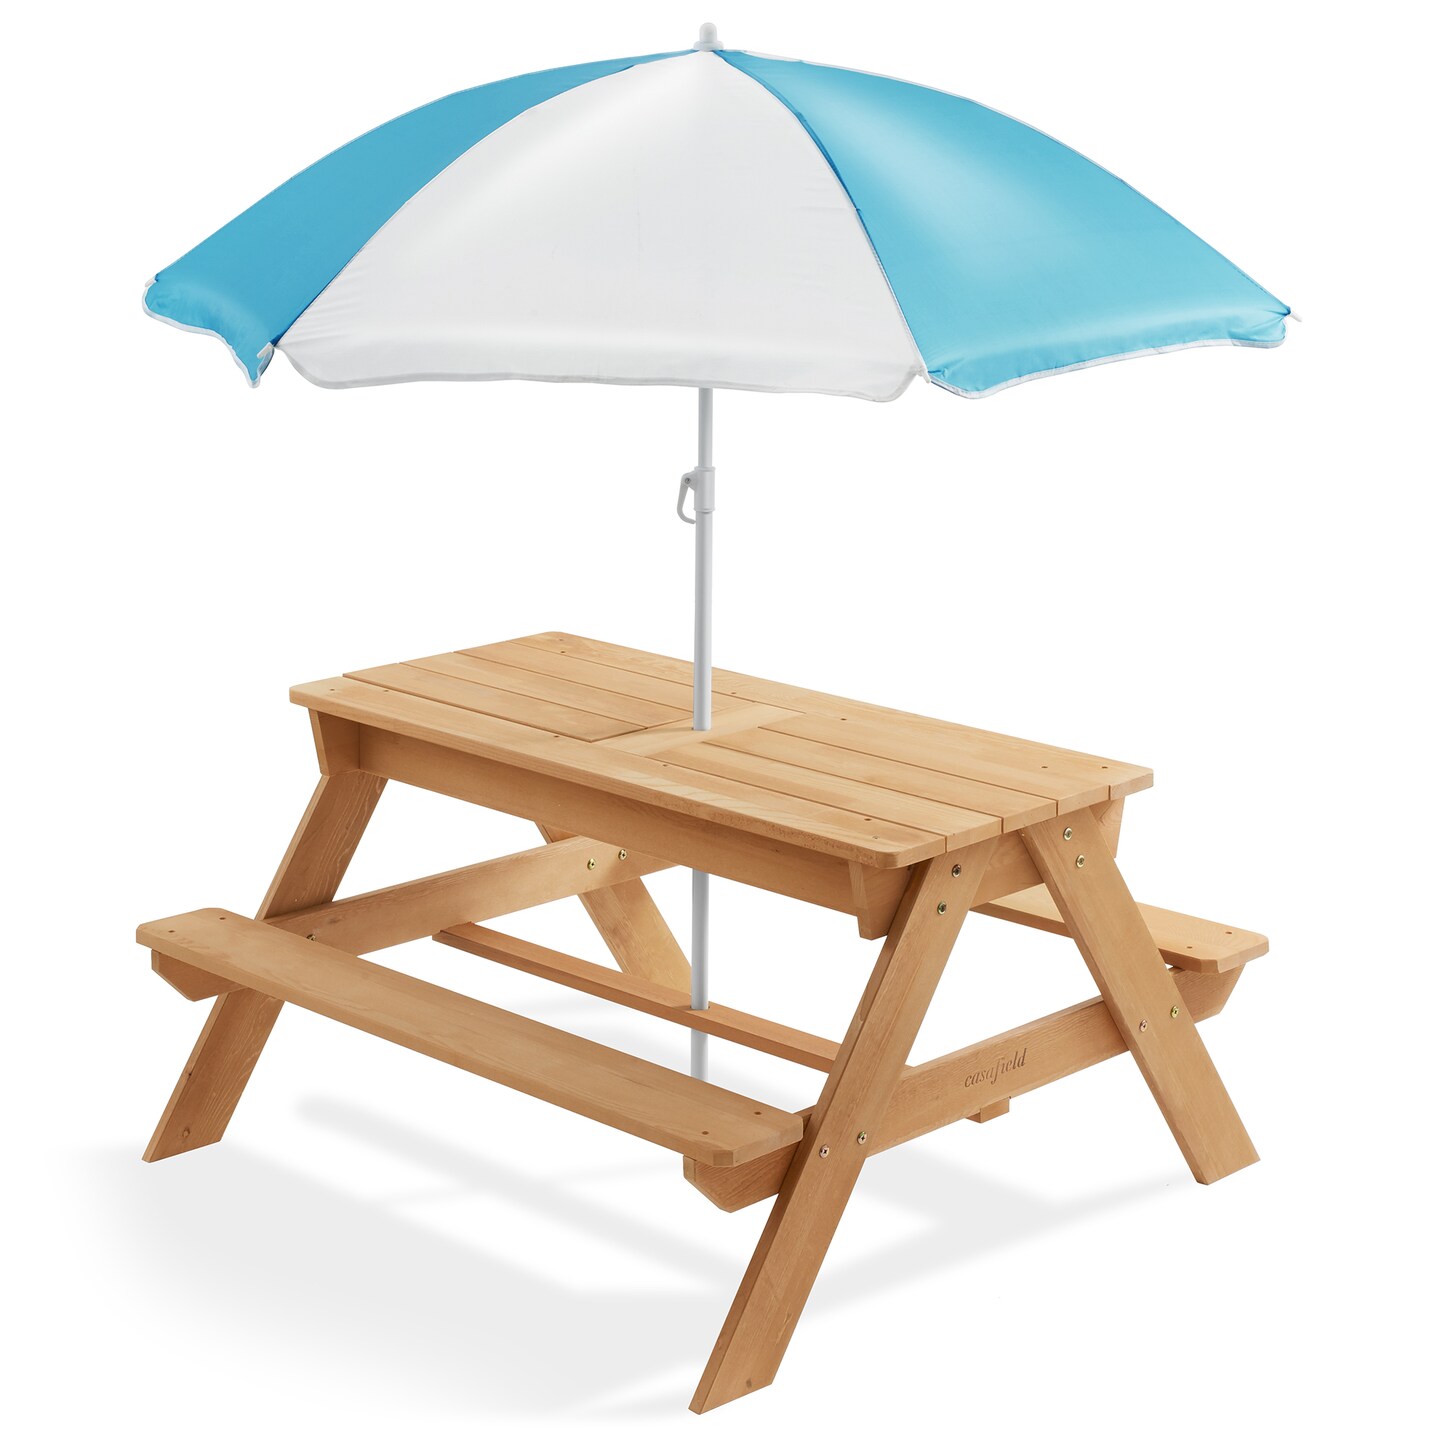 Casafield Children&#x27;s Sand and Water Activity Table, 3-in-1 Wooden Outdoor Picnic Table with Umbrella, 2 Play Boxes and Removable Lid, Natural